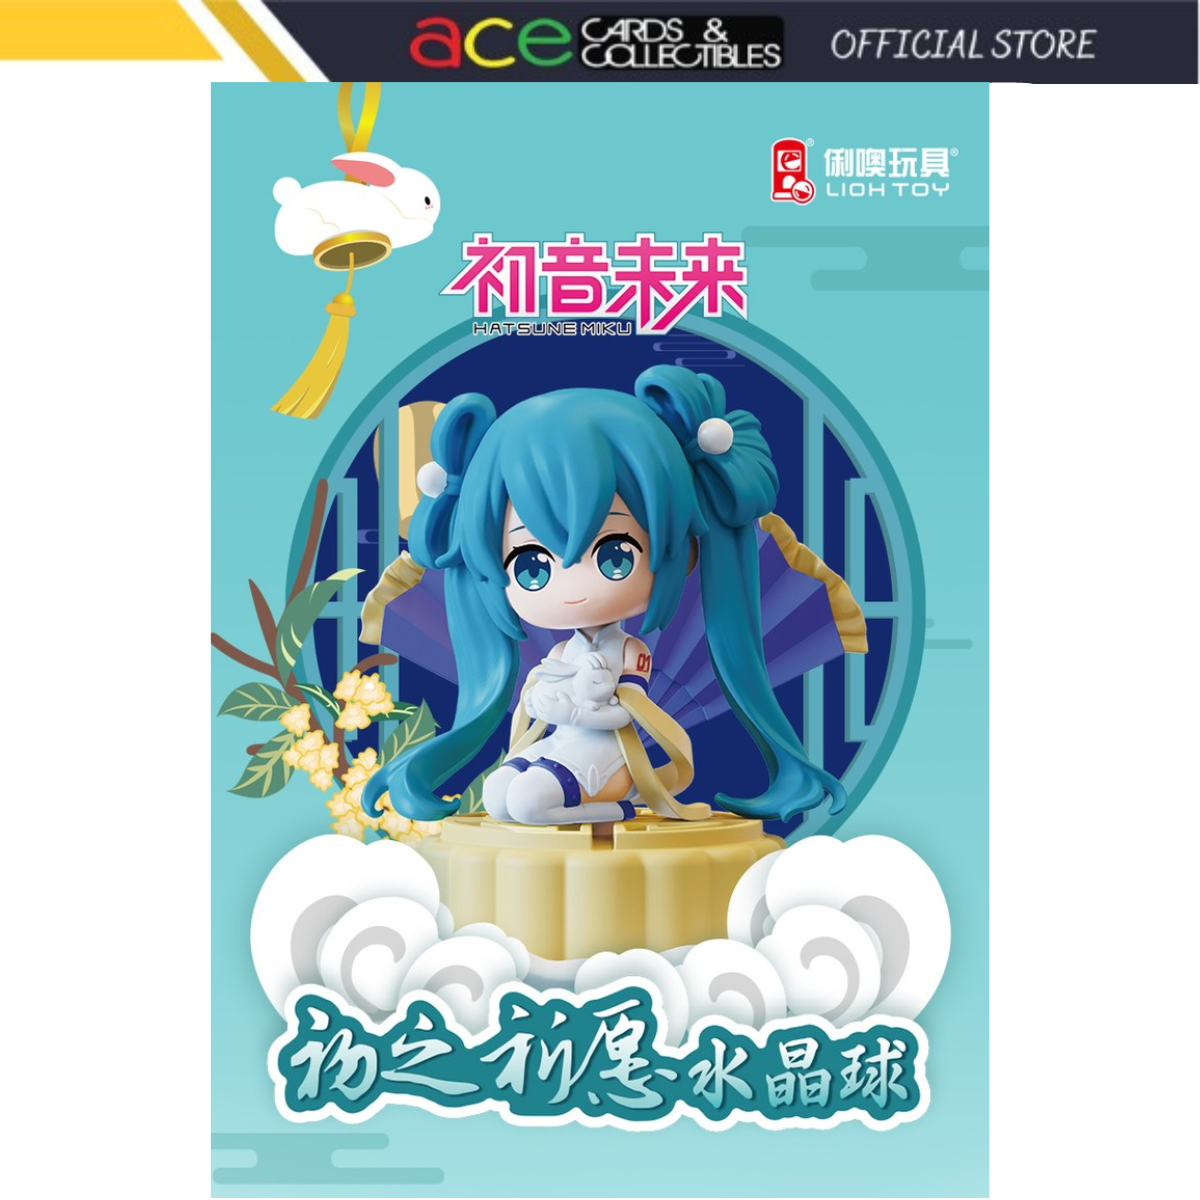 Lioh Toy x Hatsune Miku Wishes Crystal Ball Series-Single Box (Random)-52Toys-Ace Cards & Collectibles